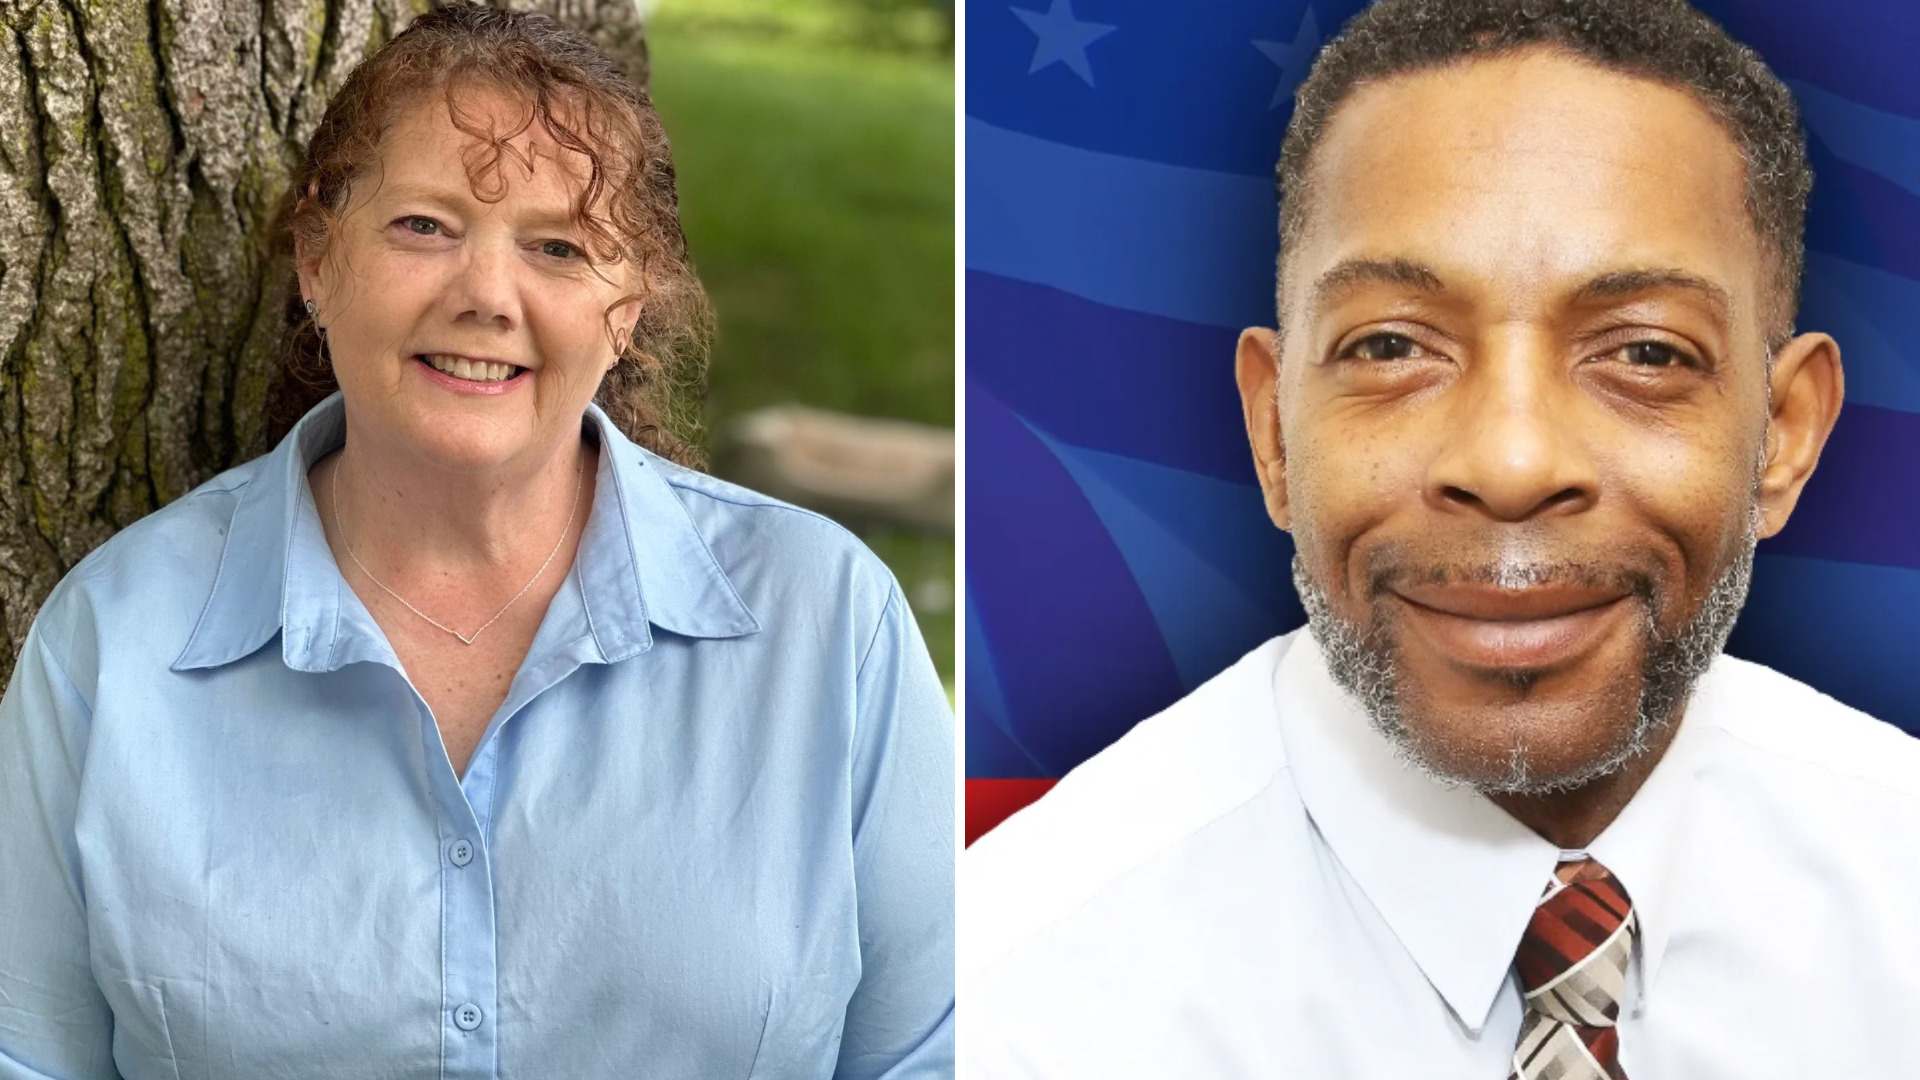 Side by side images of Laurie Brauer, a white womean with curly reddish hair and a blue collared shirt; and Seon Williams, a Black man with short black hair and a goatee, wearing a white collared shirt and patterned tie.